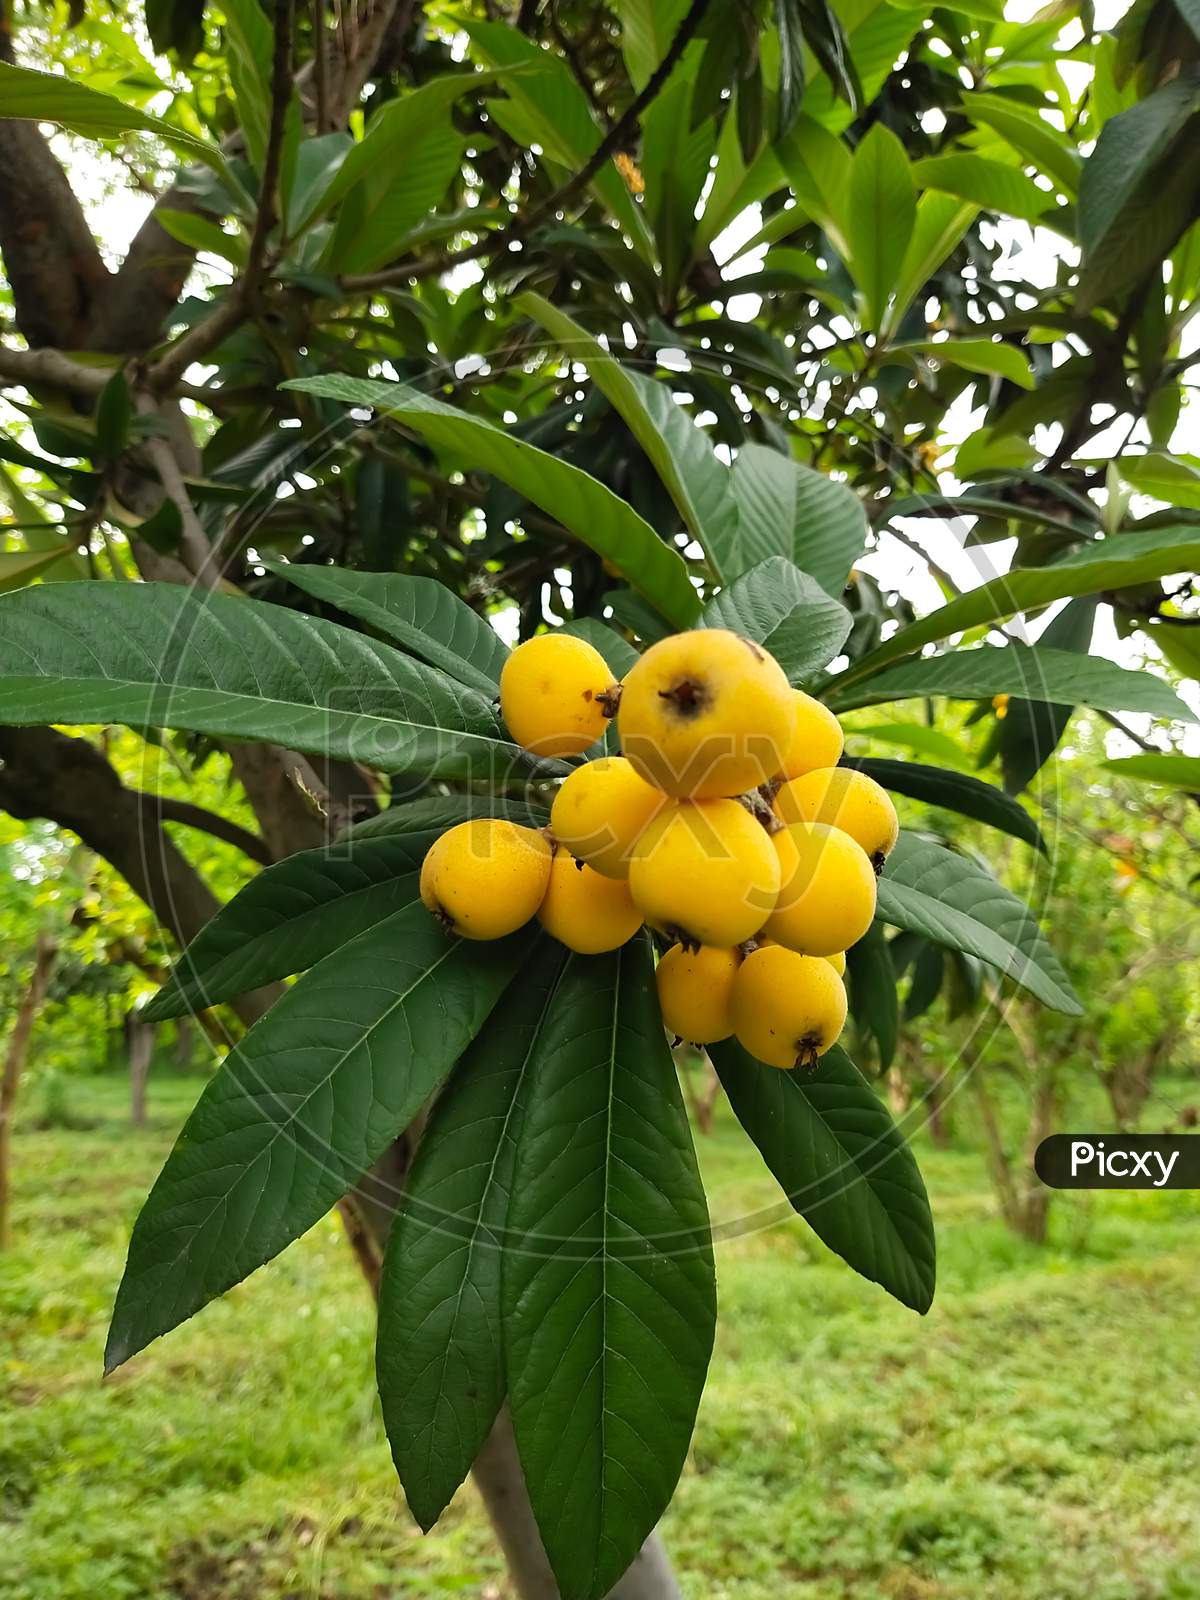 Nice bunch of Loquat hanging with the tree